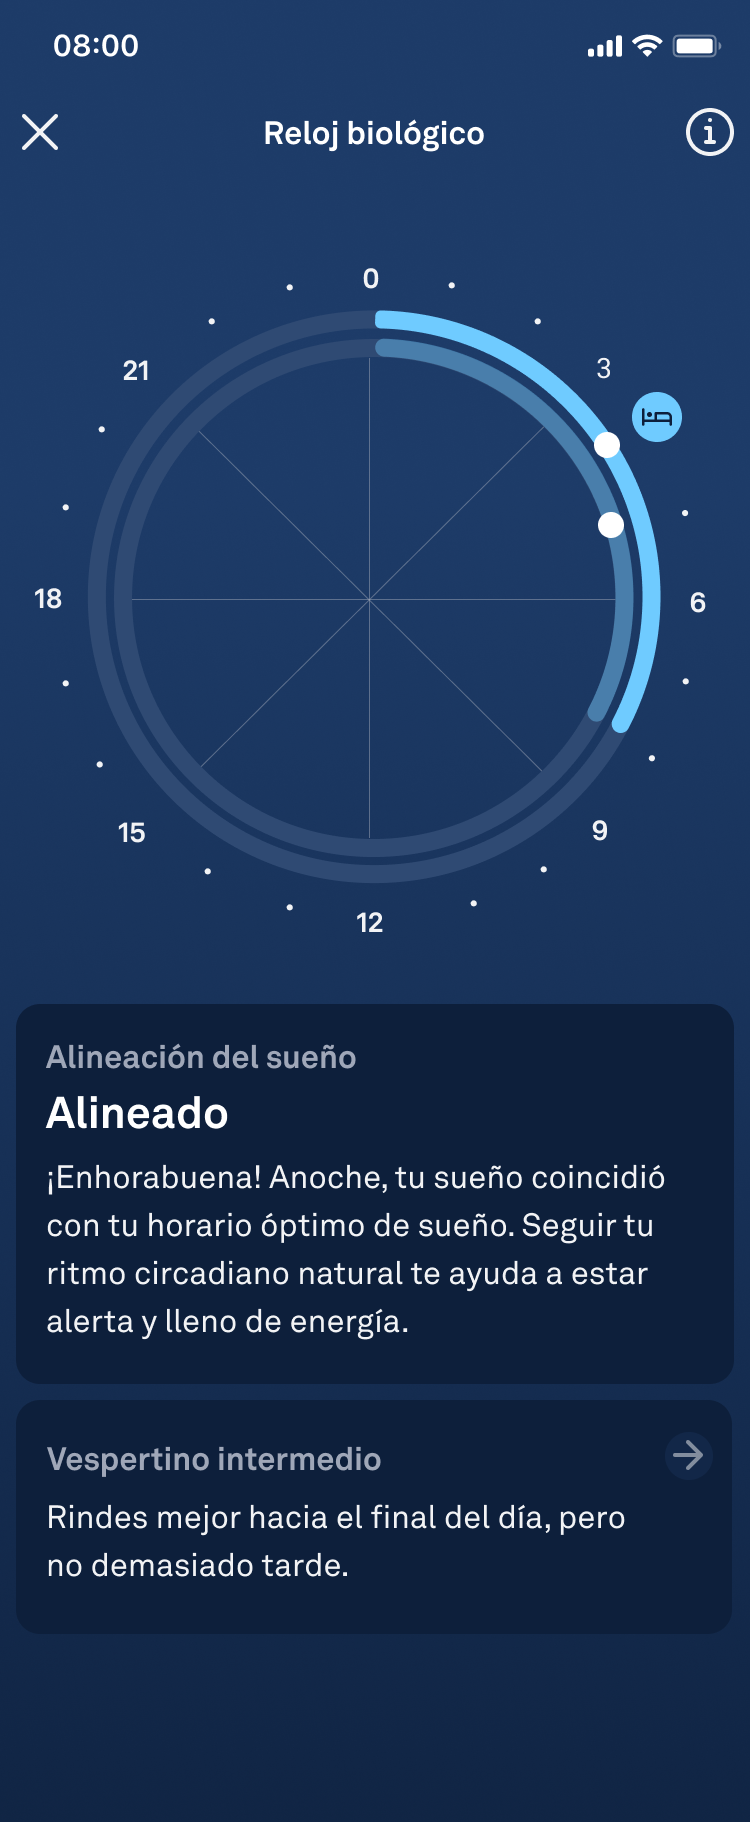 the Body Clock showing chronotype and sleep patterns in alignment